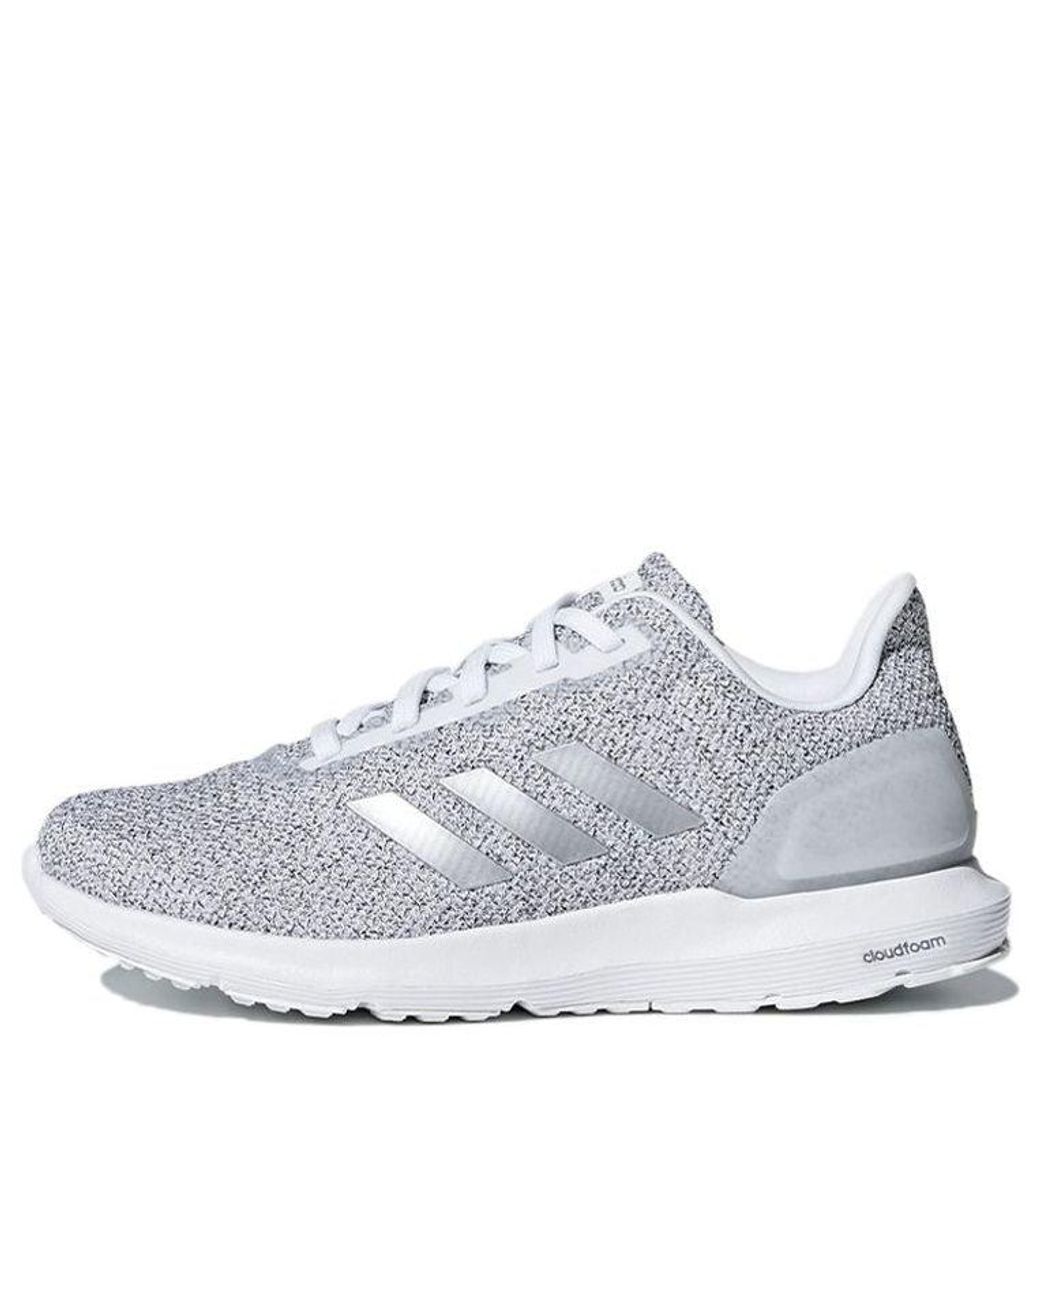 Adidas Neo Cosmic 2 Sport Shoes Grey in White | Lyst